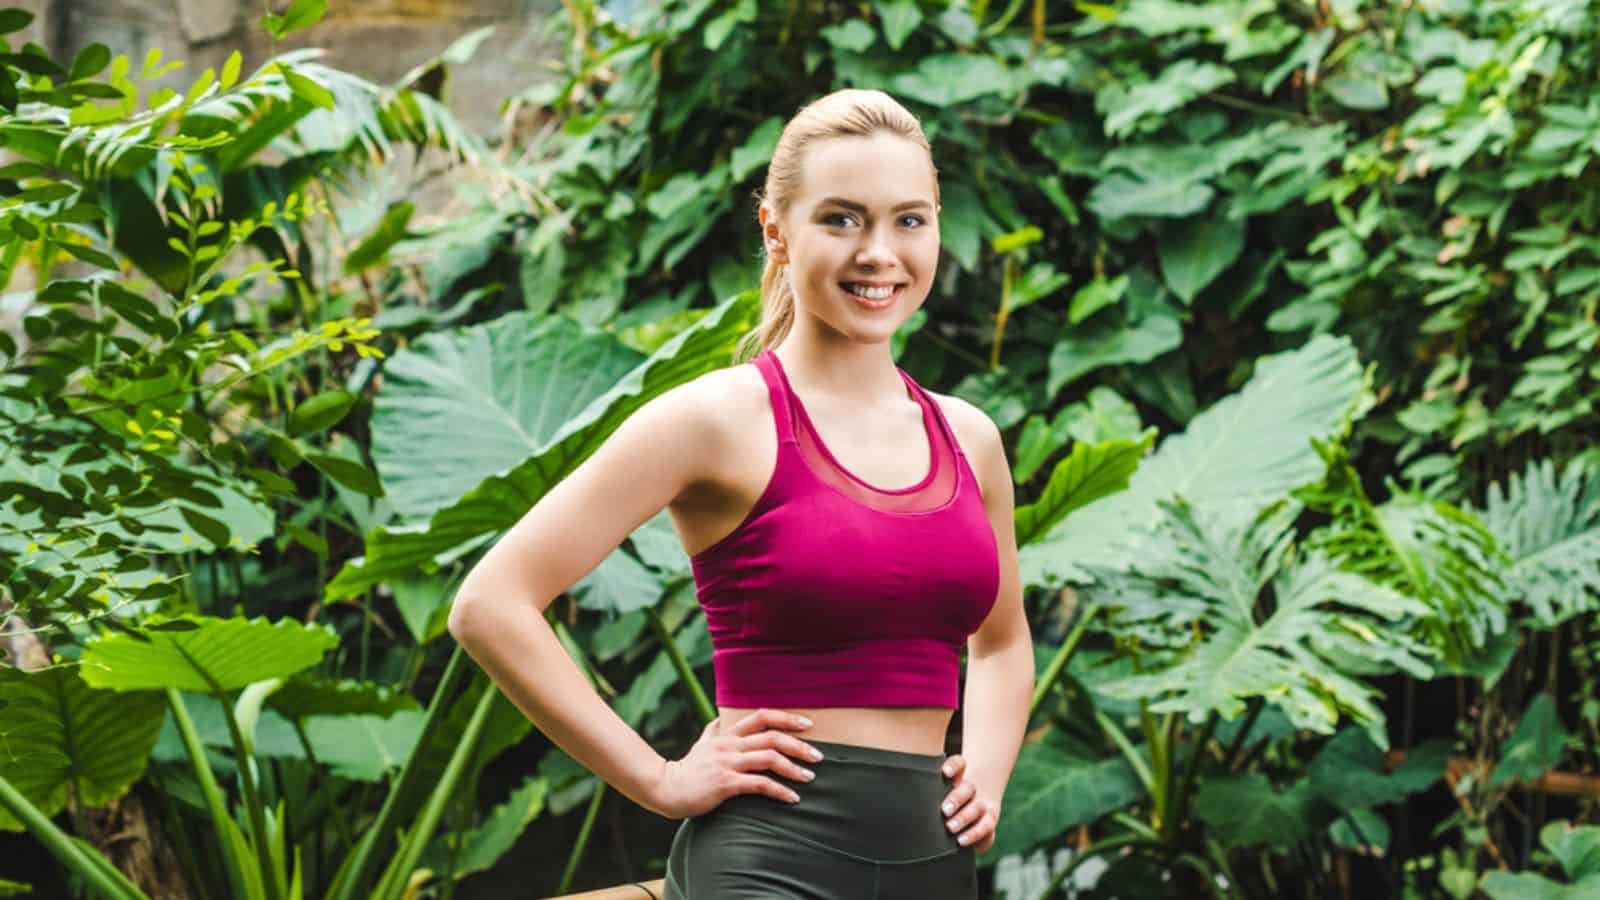 Smiling young woman in modern sportswear looking at camera in park